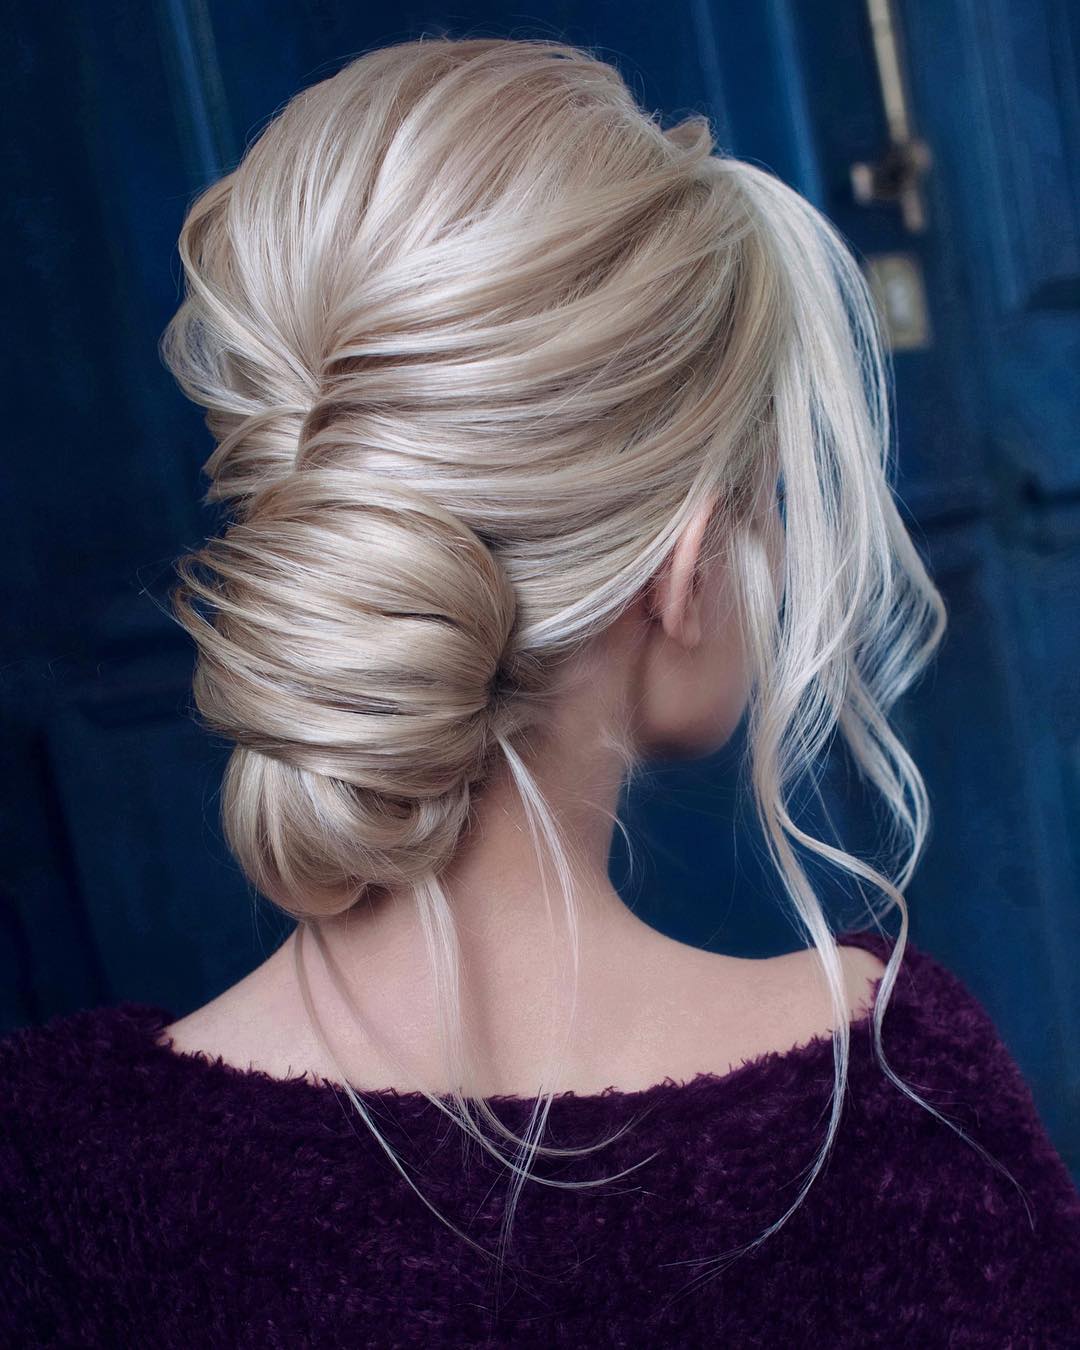 Best Updo Hairstyles for Medium Length Hair, Prom and Homecoming Hair Style Ideas